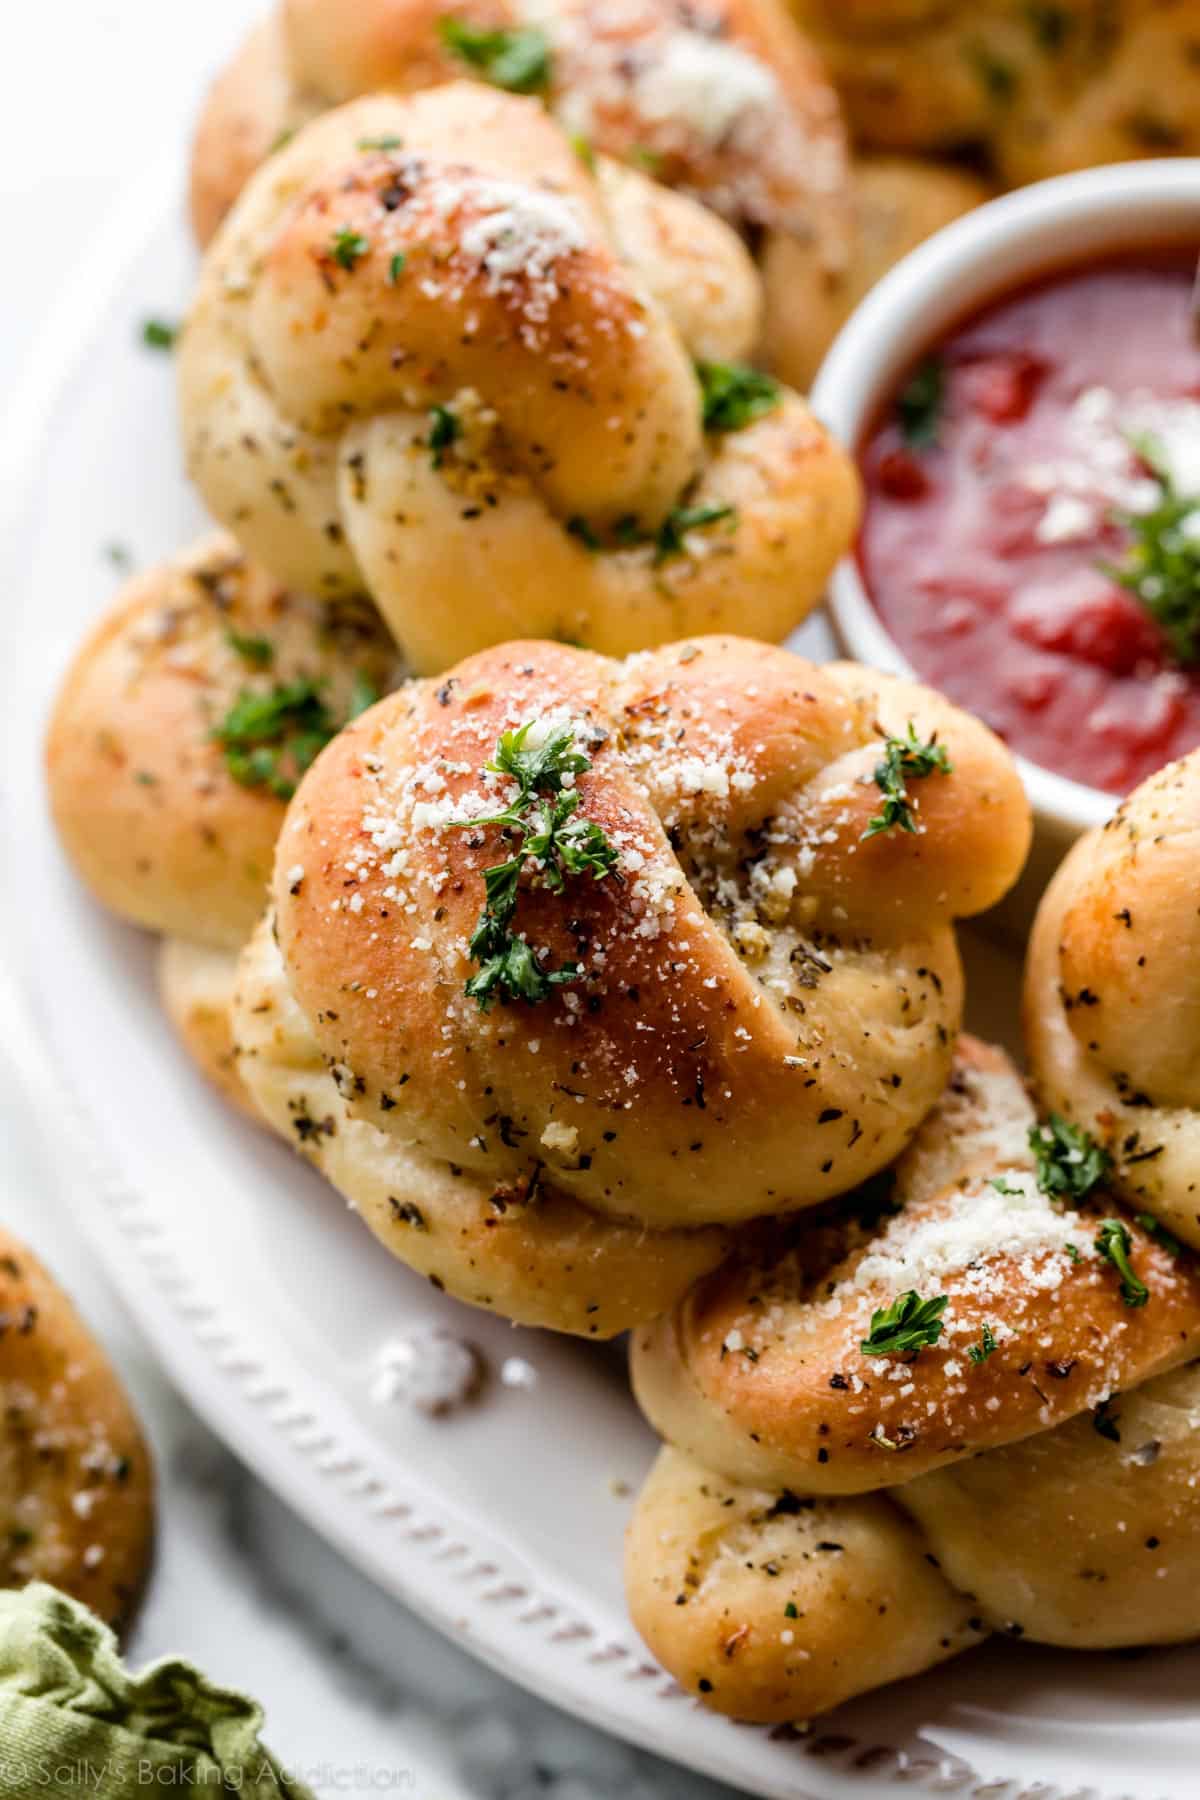 Knotted bread with garlic butter spread on top.